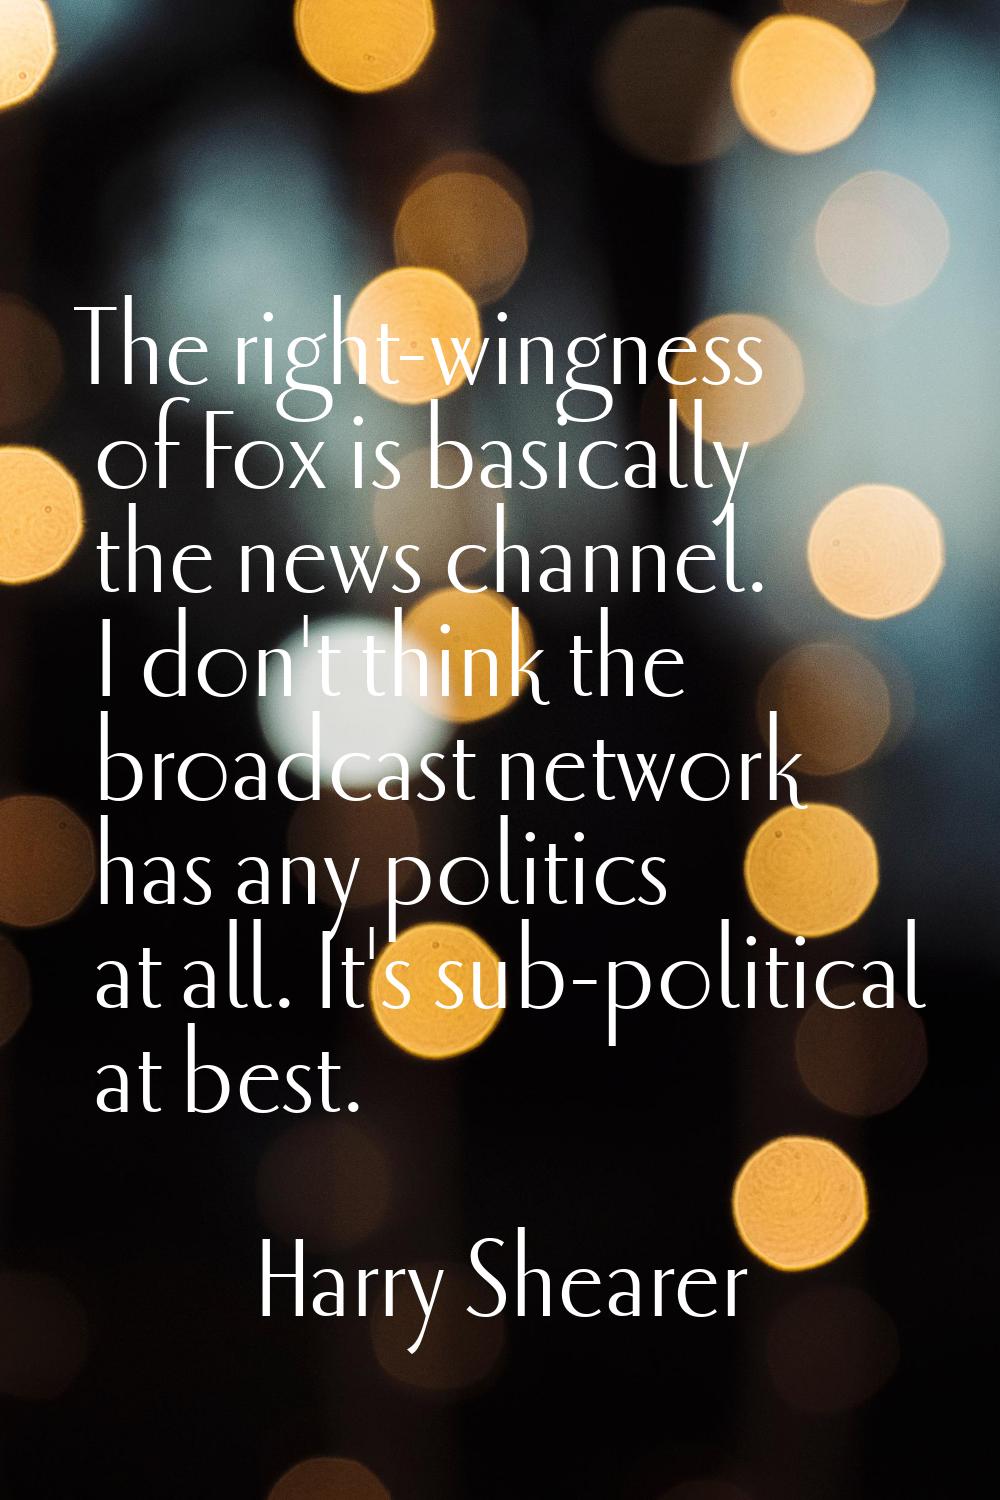 The right-wingness of Fox is basically the news channel. I don't think the broadcast network has an